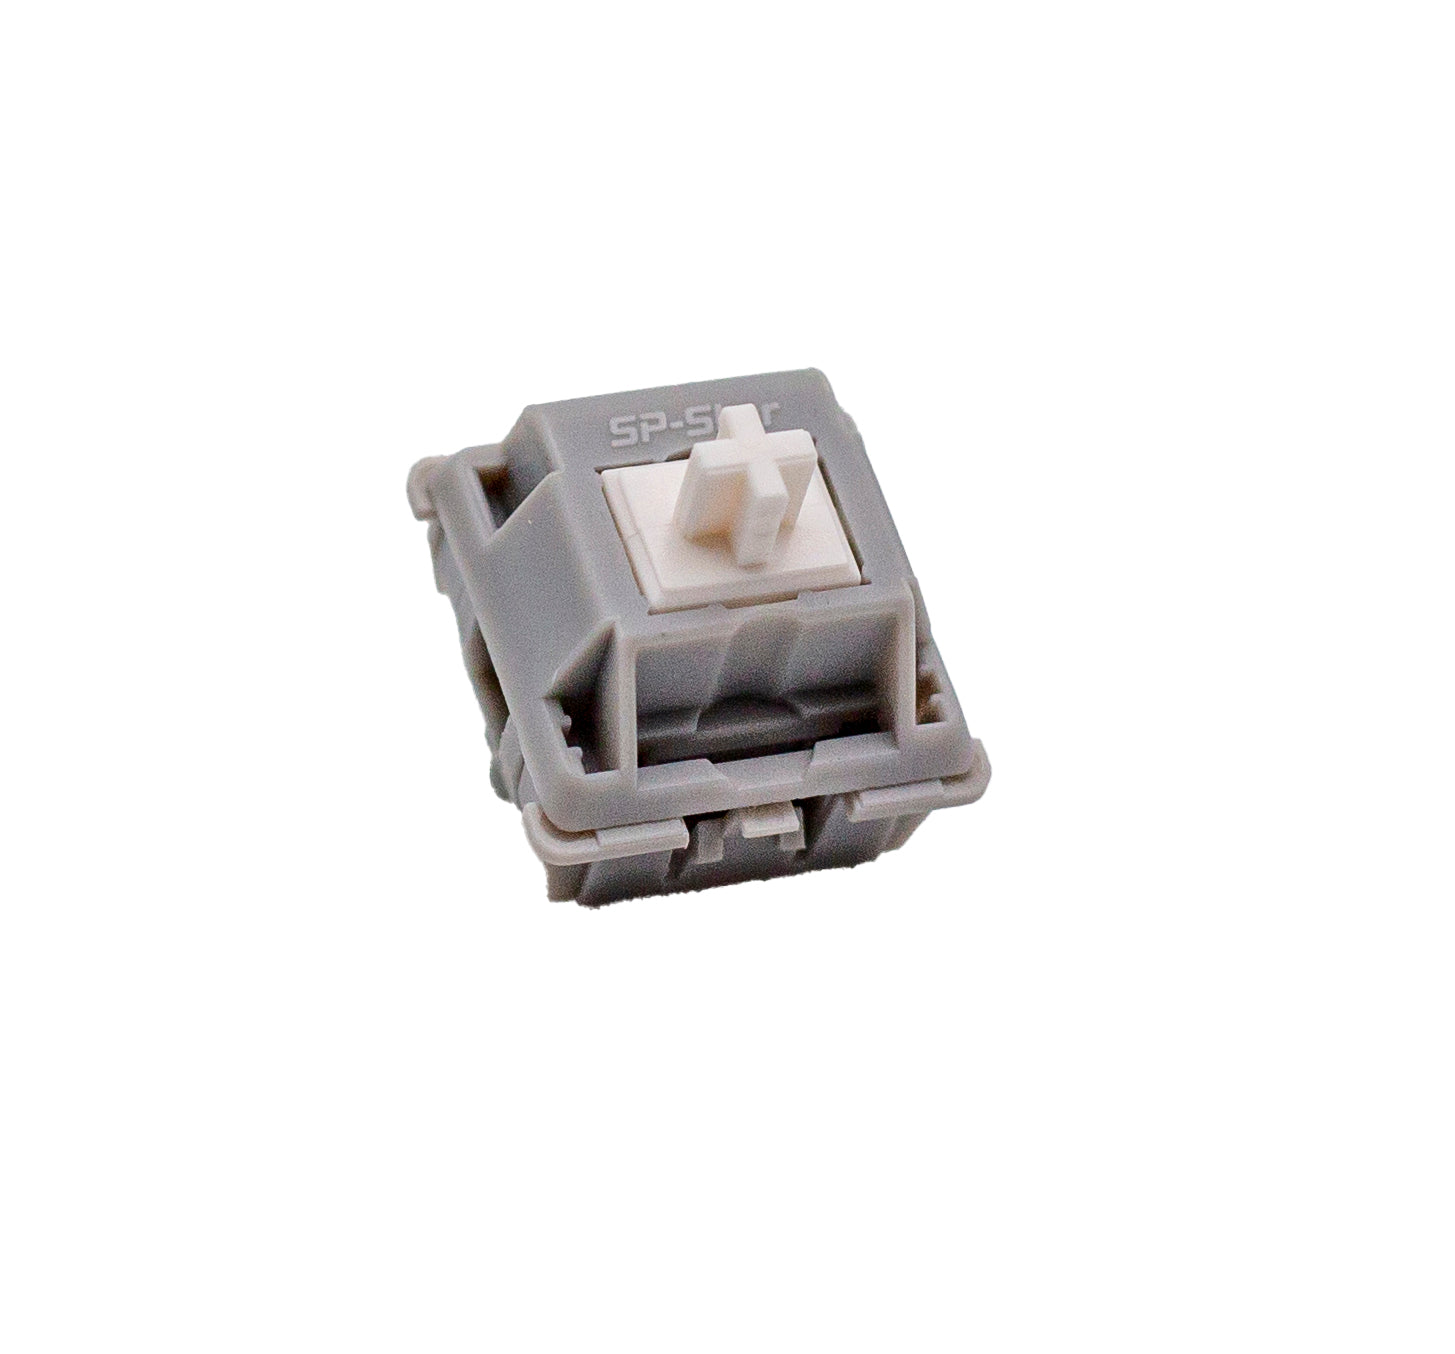 SP-Star Meteor White Linear Switches